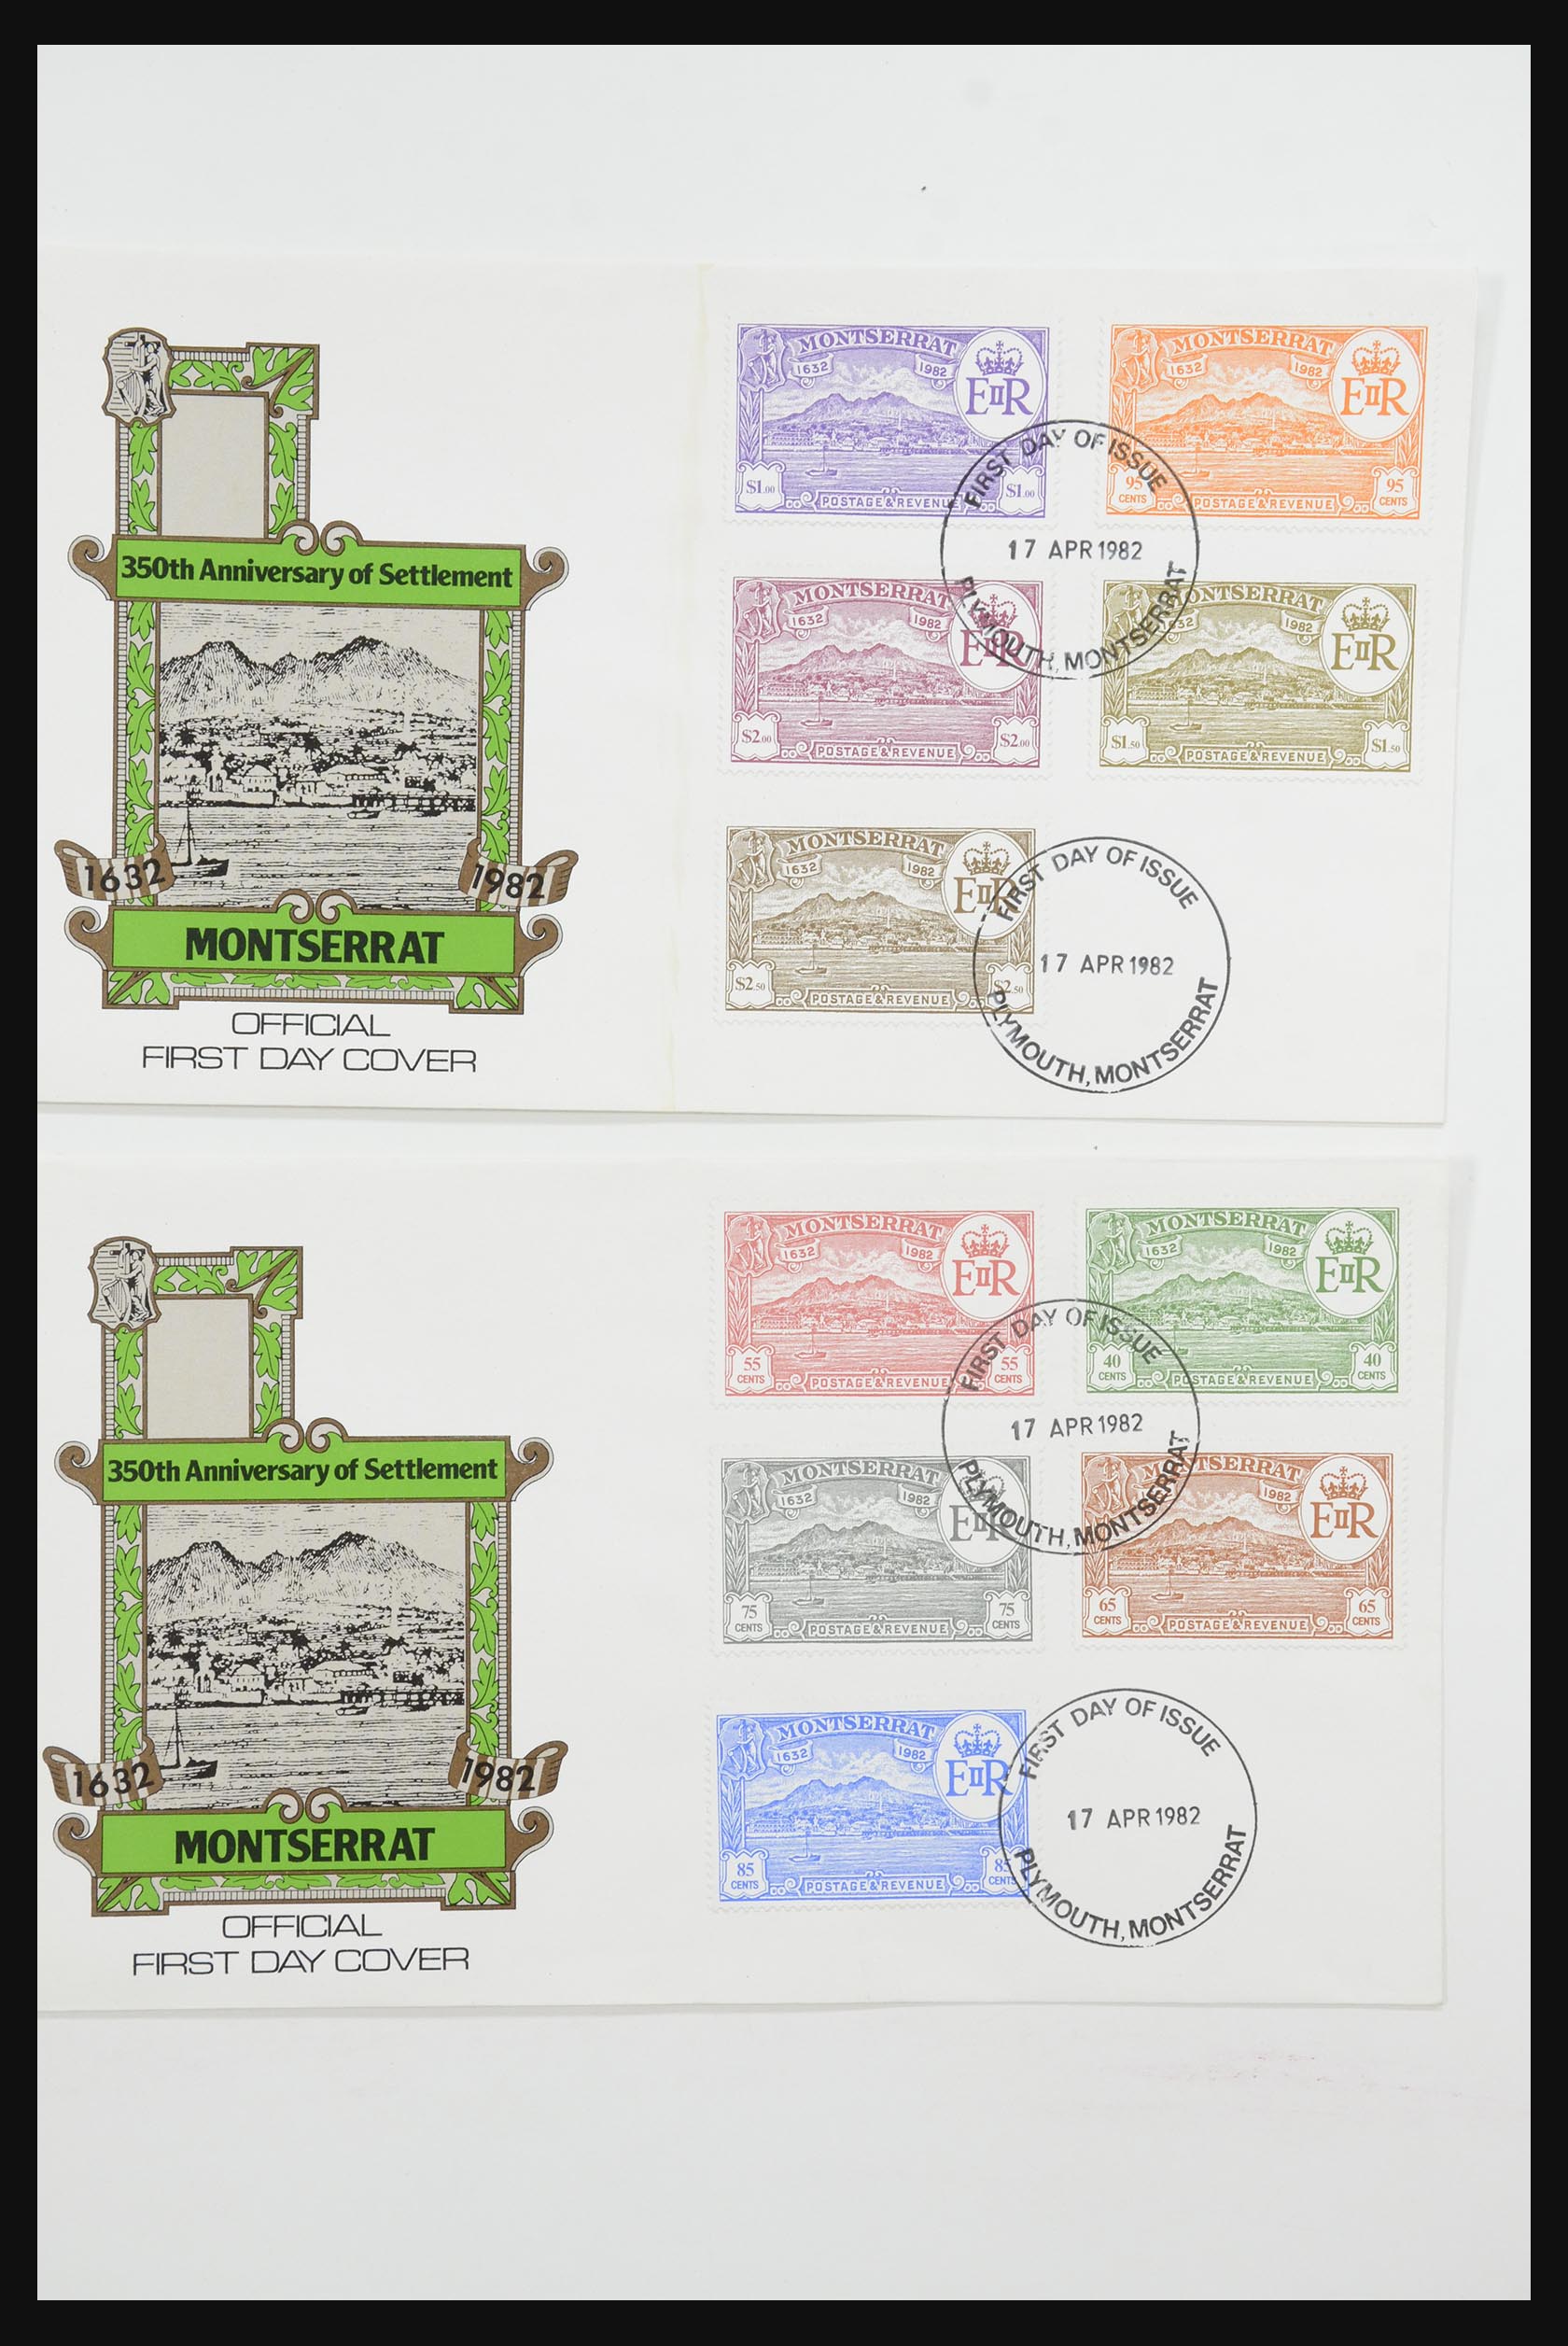 31726 077 - 31726 Great Britain and colonies covers and FDC's 1937-2001.